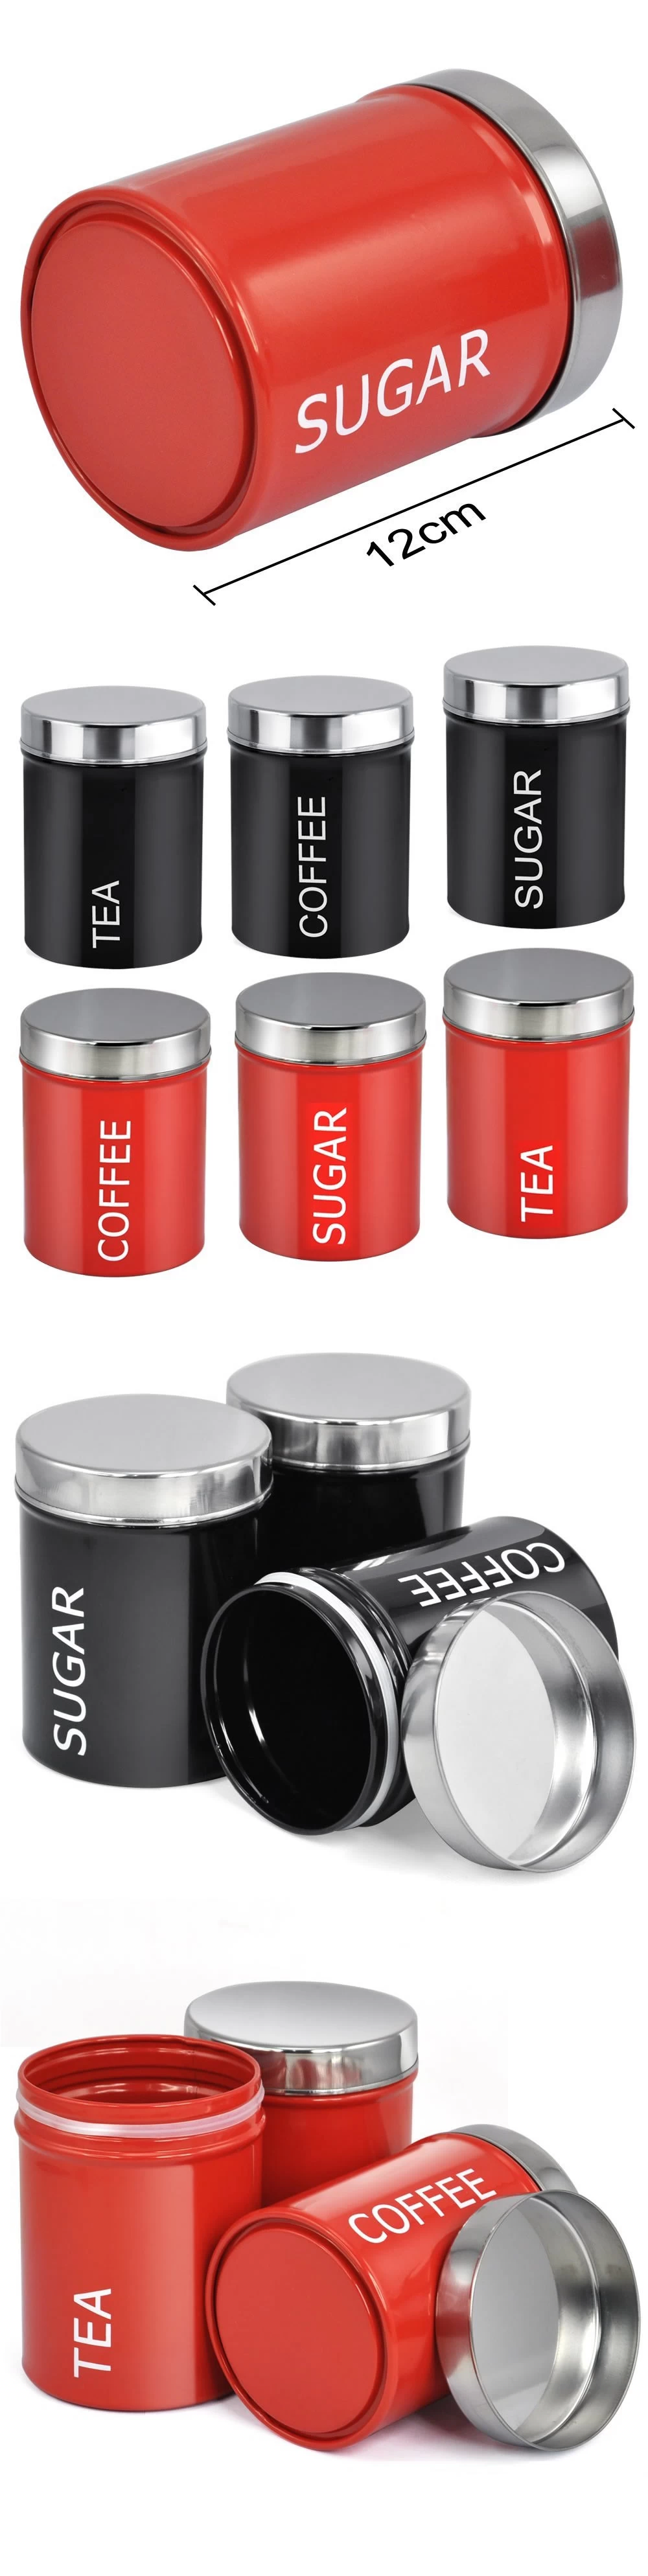 Stainless steel canister